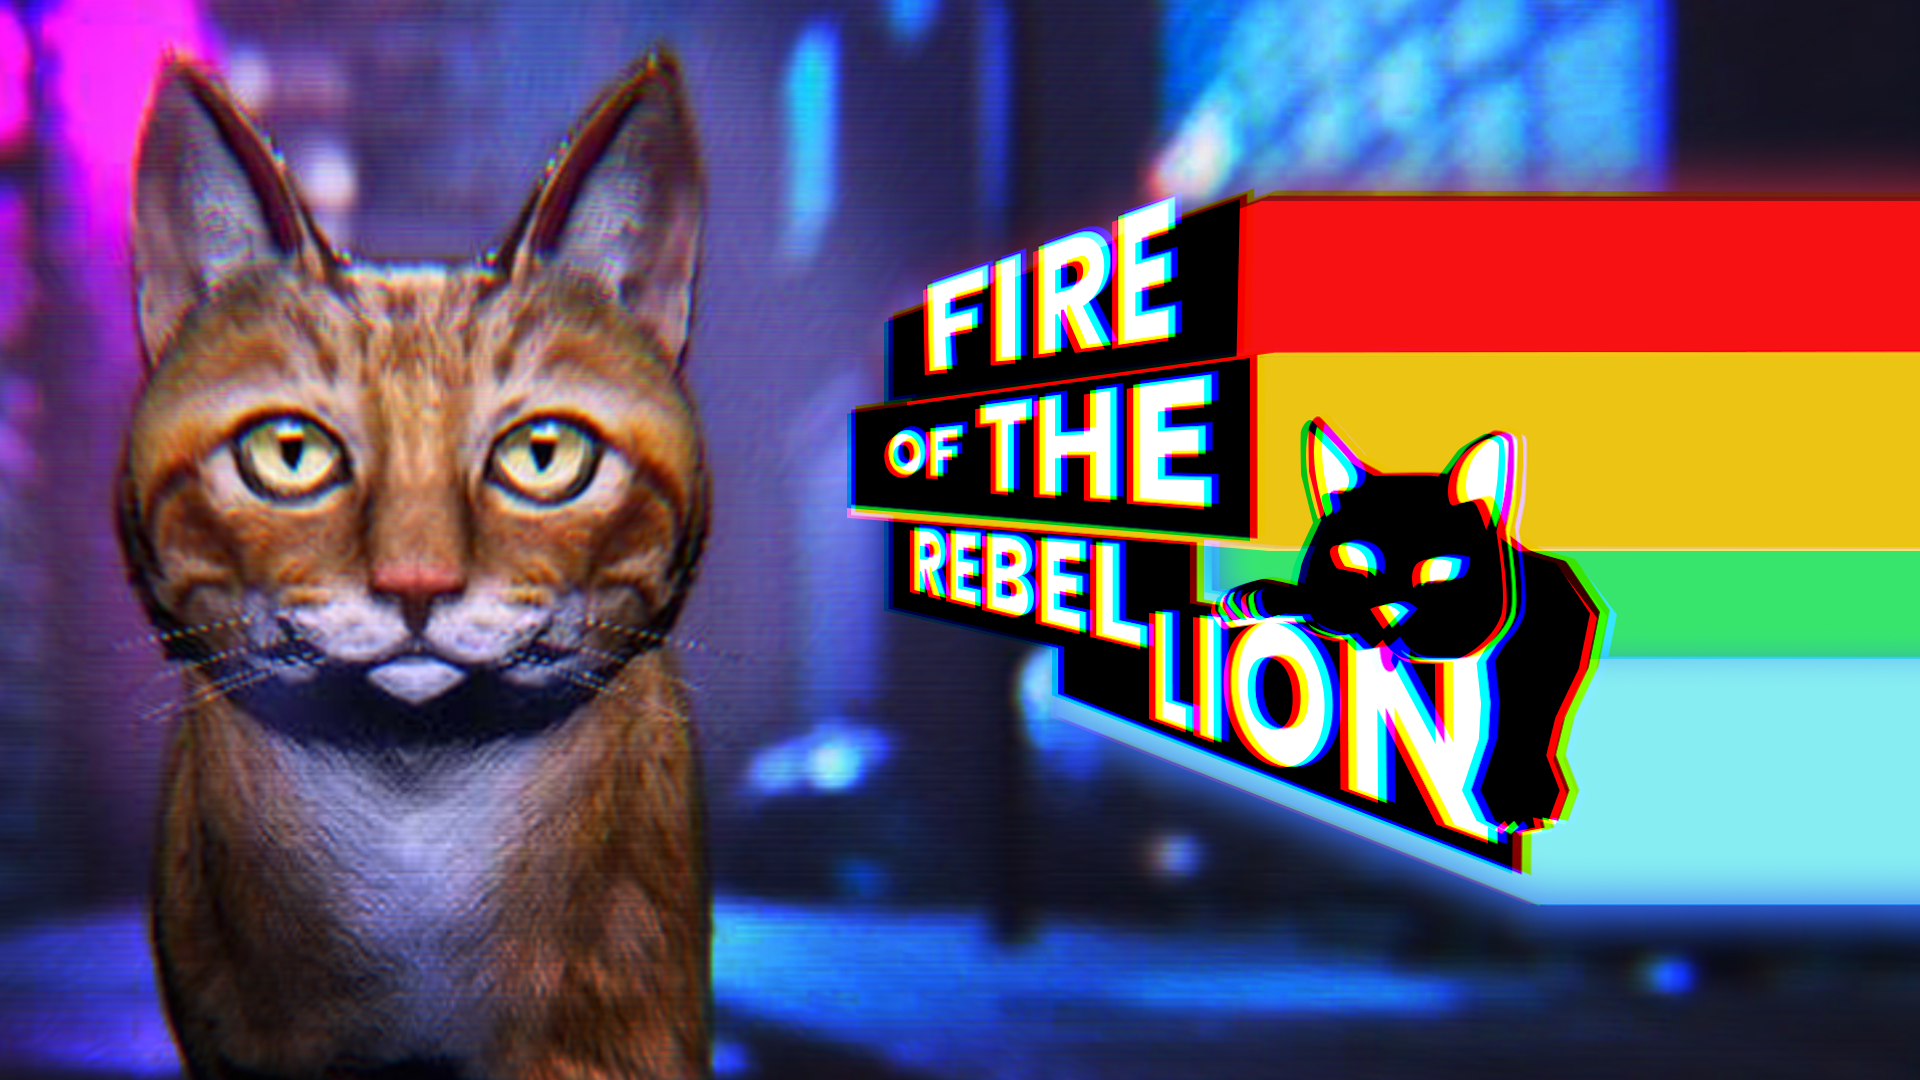 Fire of the Rebel Lion, Furious Pussy